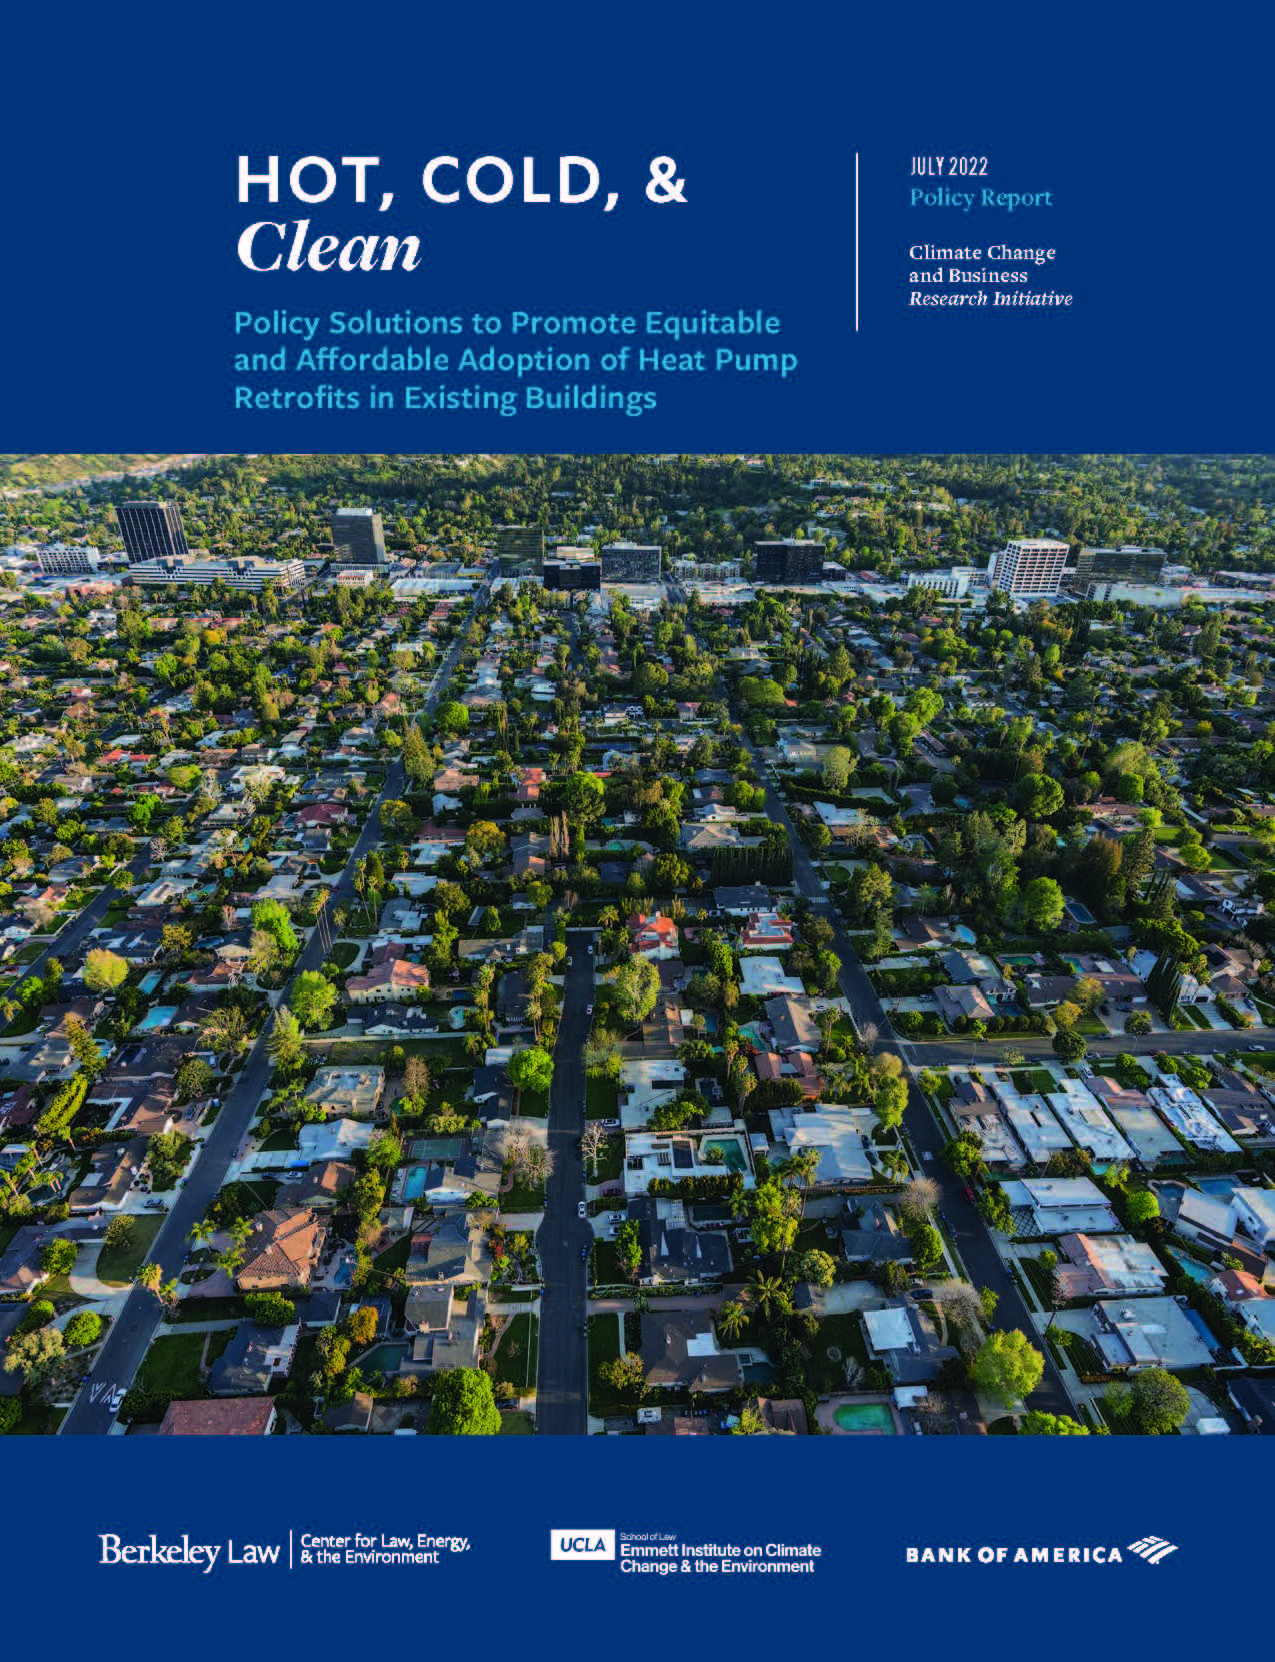 Cover Photo for Hot, Cold, & Clean Report; features sprawling suburban city overhead view from a drone camera